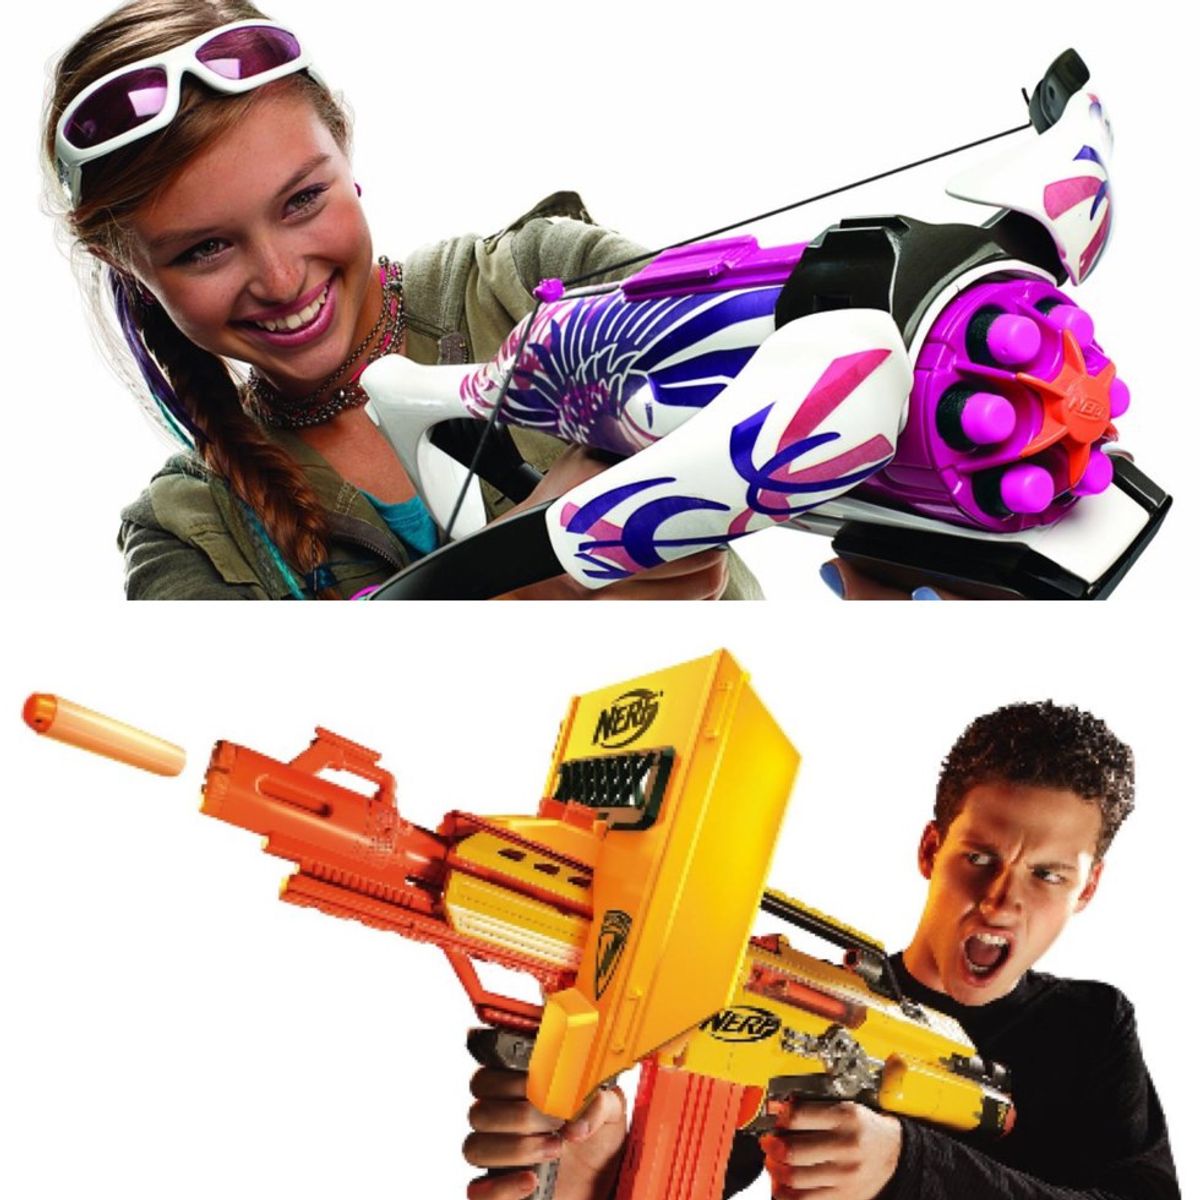 Why Is Marketing For Nerf Guns So Different For Girls Than Boys?